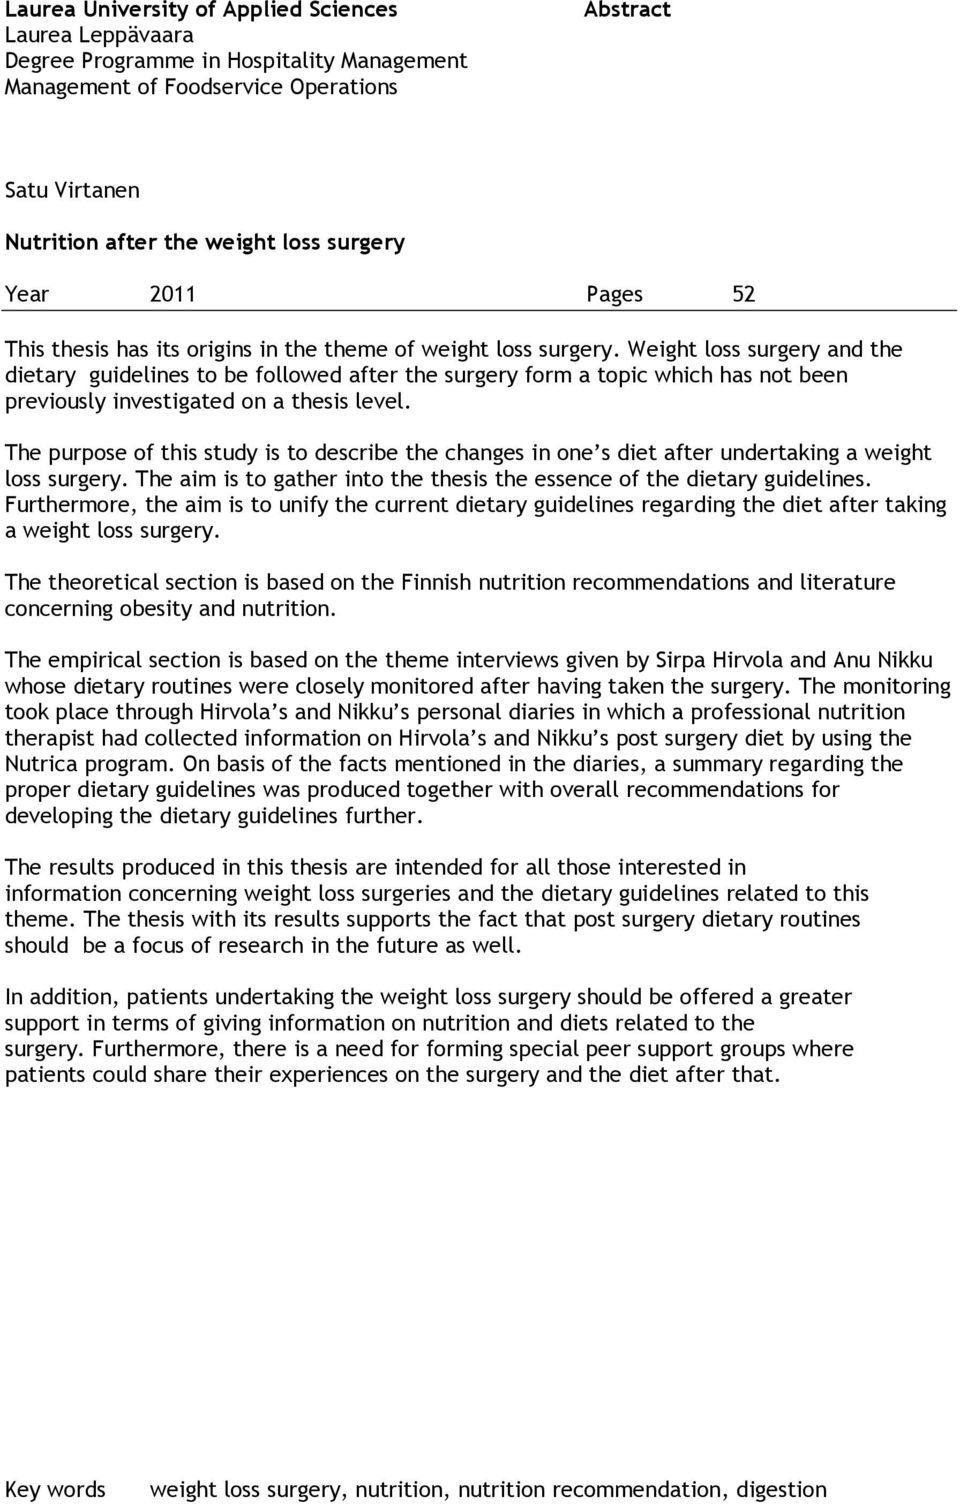 Weight loss surgery and the dietary guidelines to be followed after the surgery form a topic which has not been previously investigated on a thesis level.